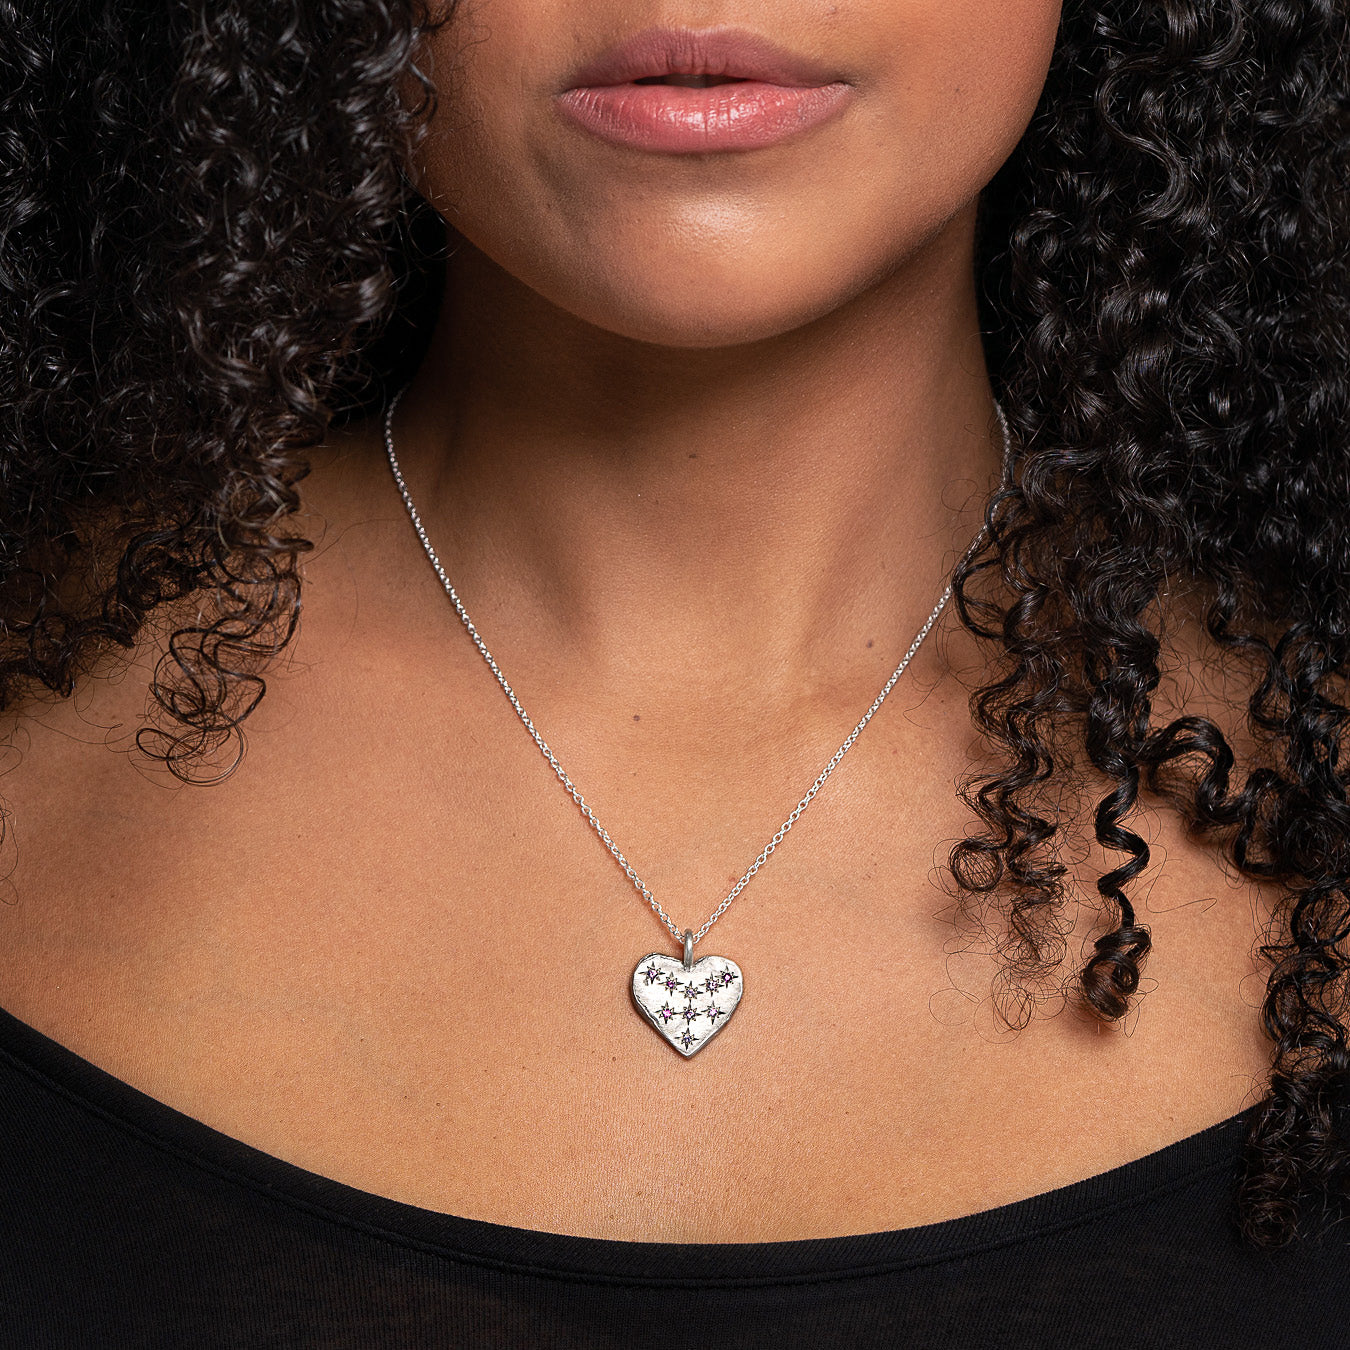 Shades Of Pink Sapphire Big Heart Necklace In Silver (In Stock)